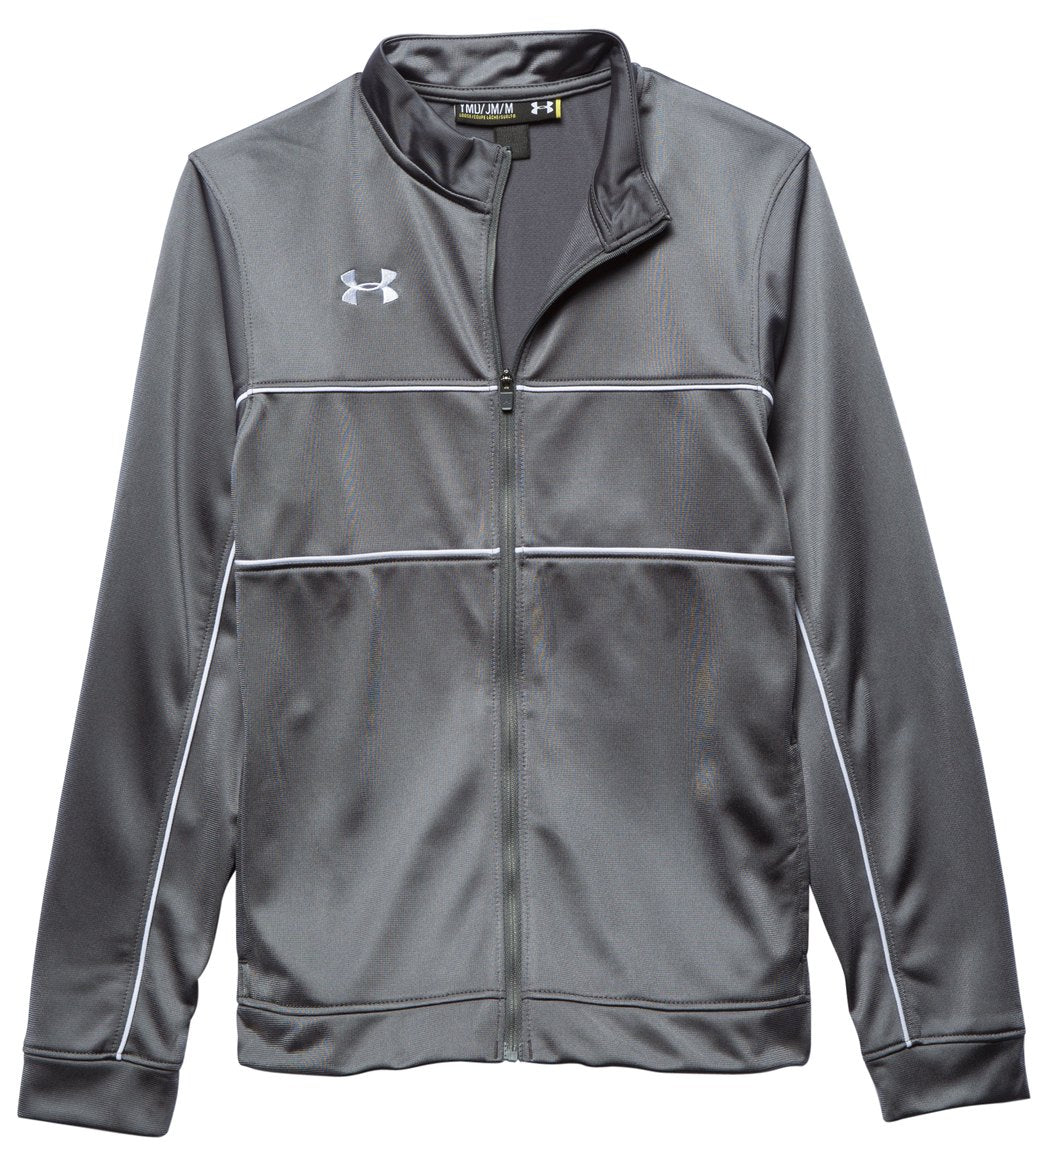 Under Armour Youth Rival Knit Warm-Up Jacket - Graphite/White Medium Polyester - Swimoutlet.com